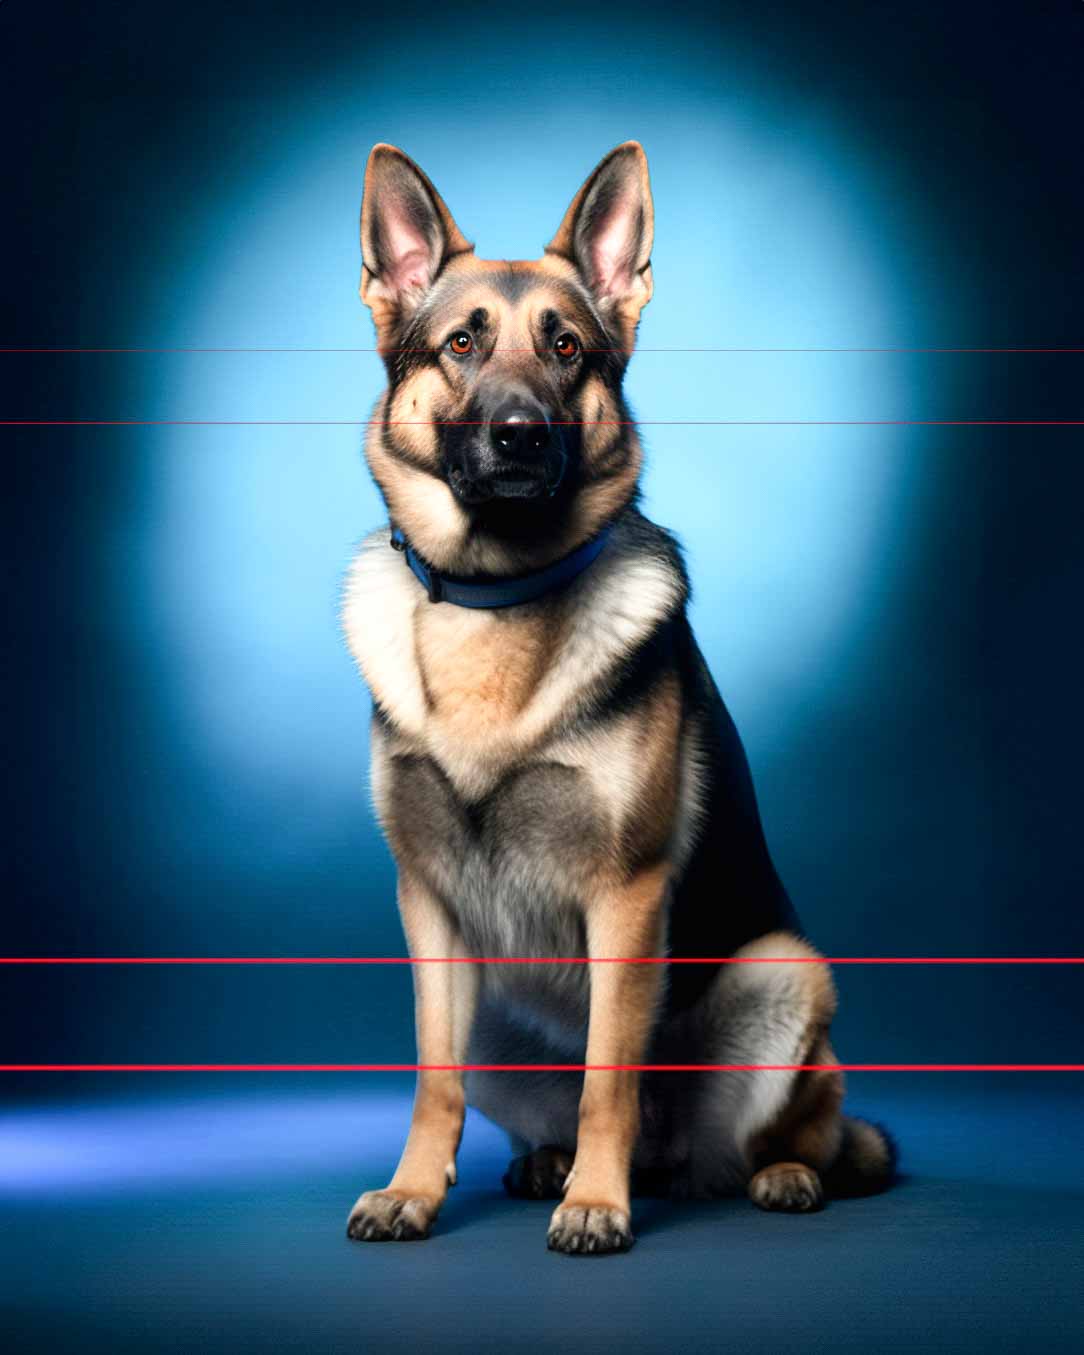 A German Shepherd sits on a blue background in this picture. The dog has large upright ears, a dark face, and tan and black fur. Sporting a blue collar, the dog looks directly into the camera.